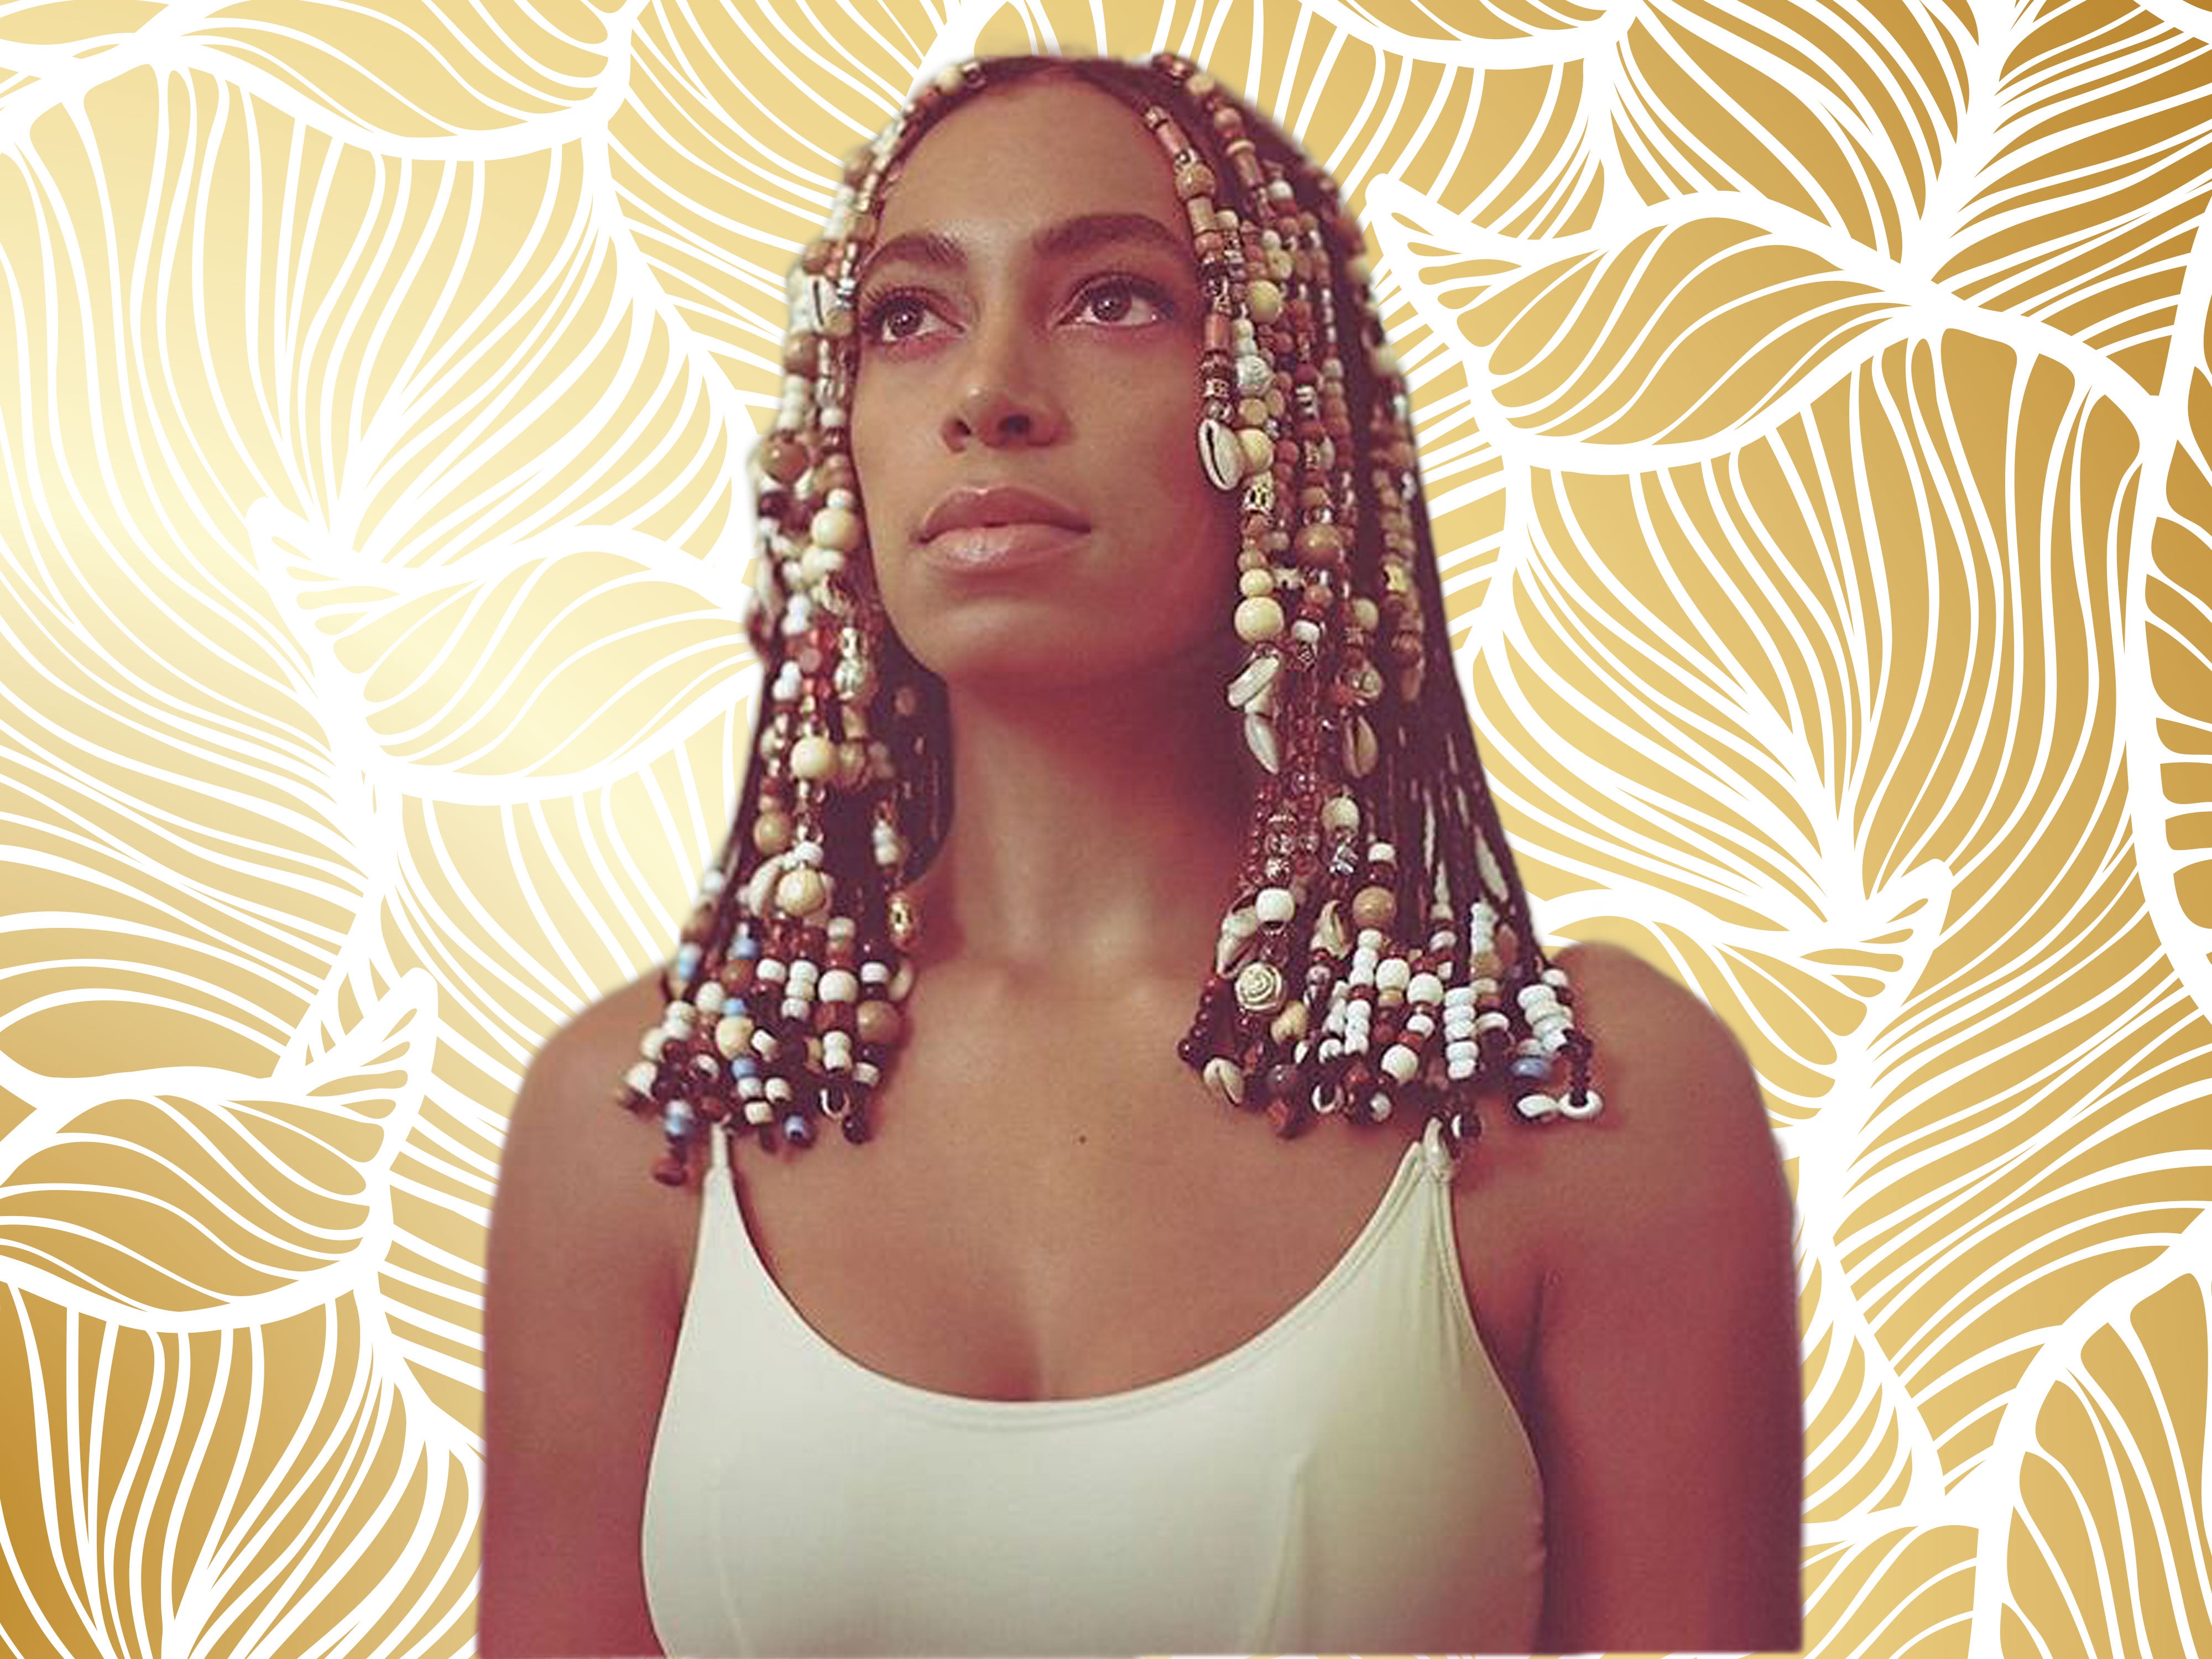 All Hail The Durag: How Solange's Statement Just Uplifted The Culture